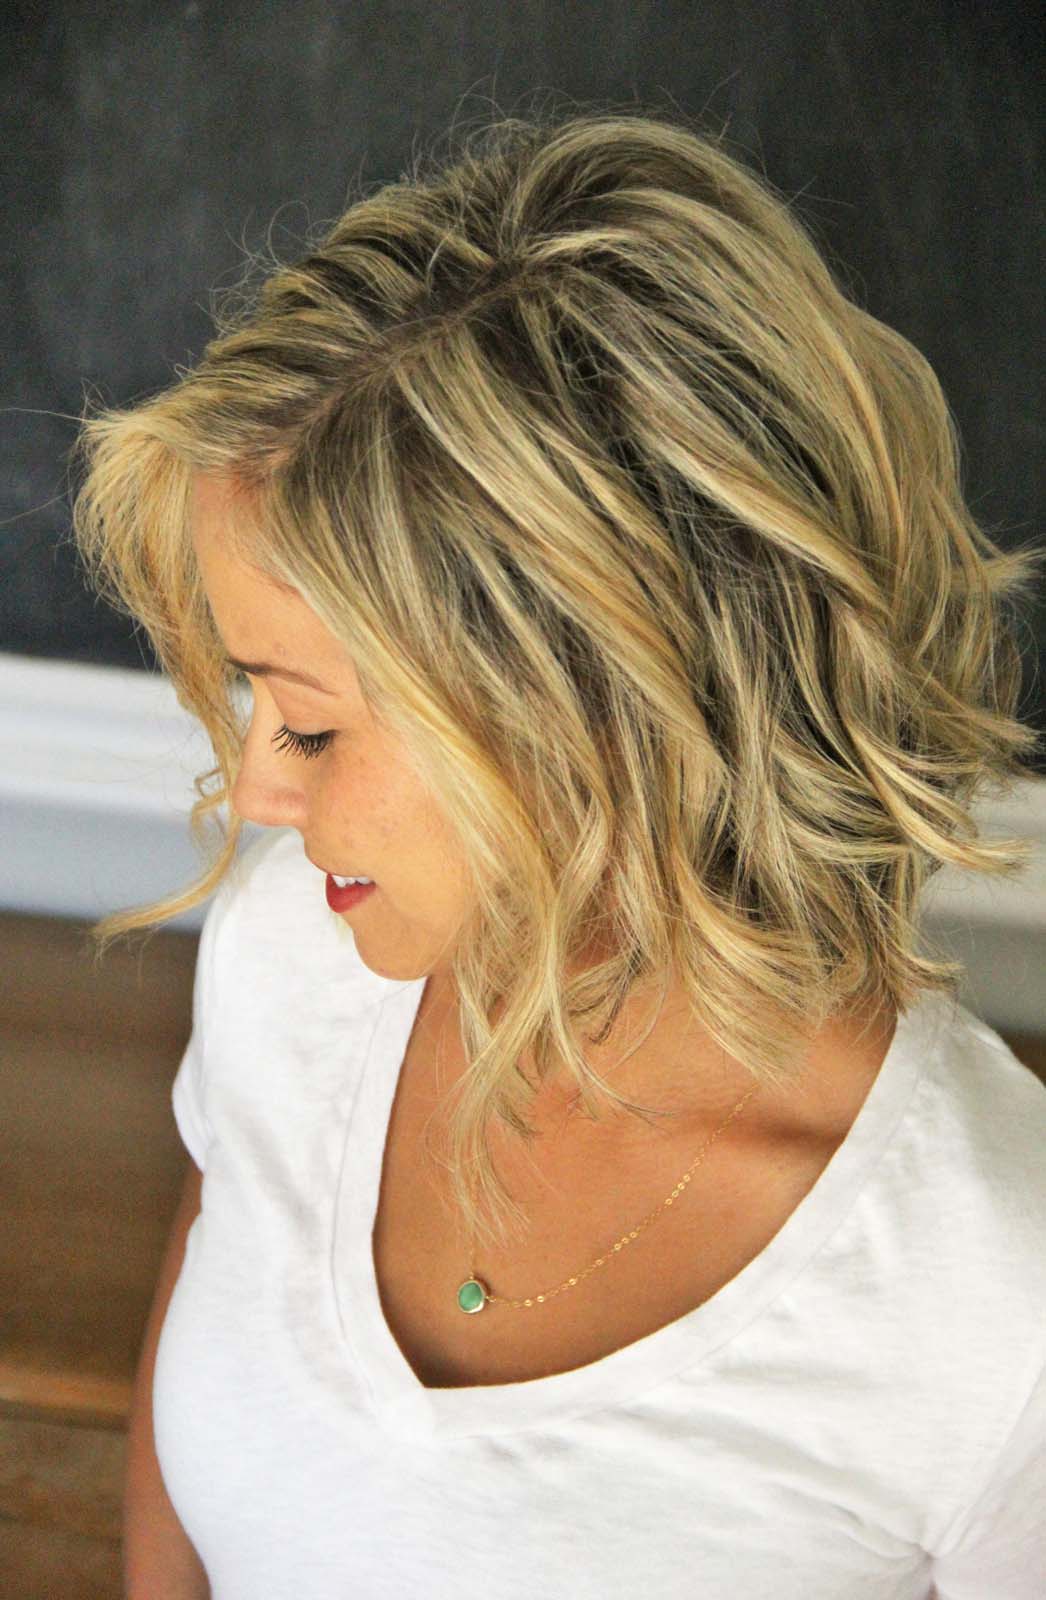 How To Beach Waves For Short Hair We Know How To Do It